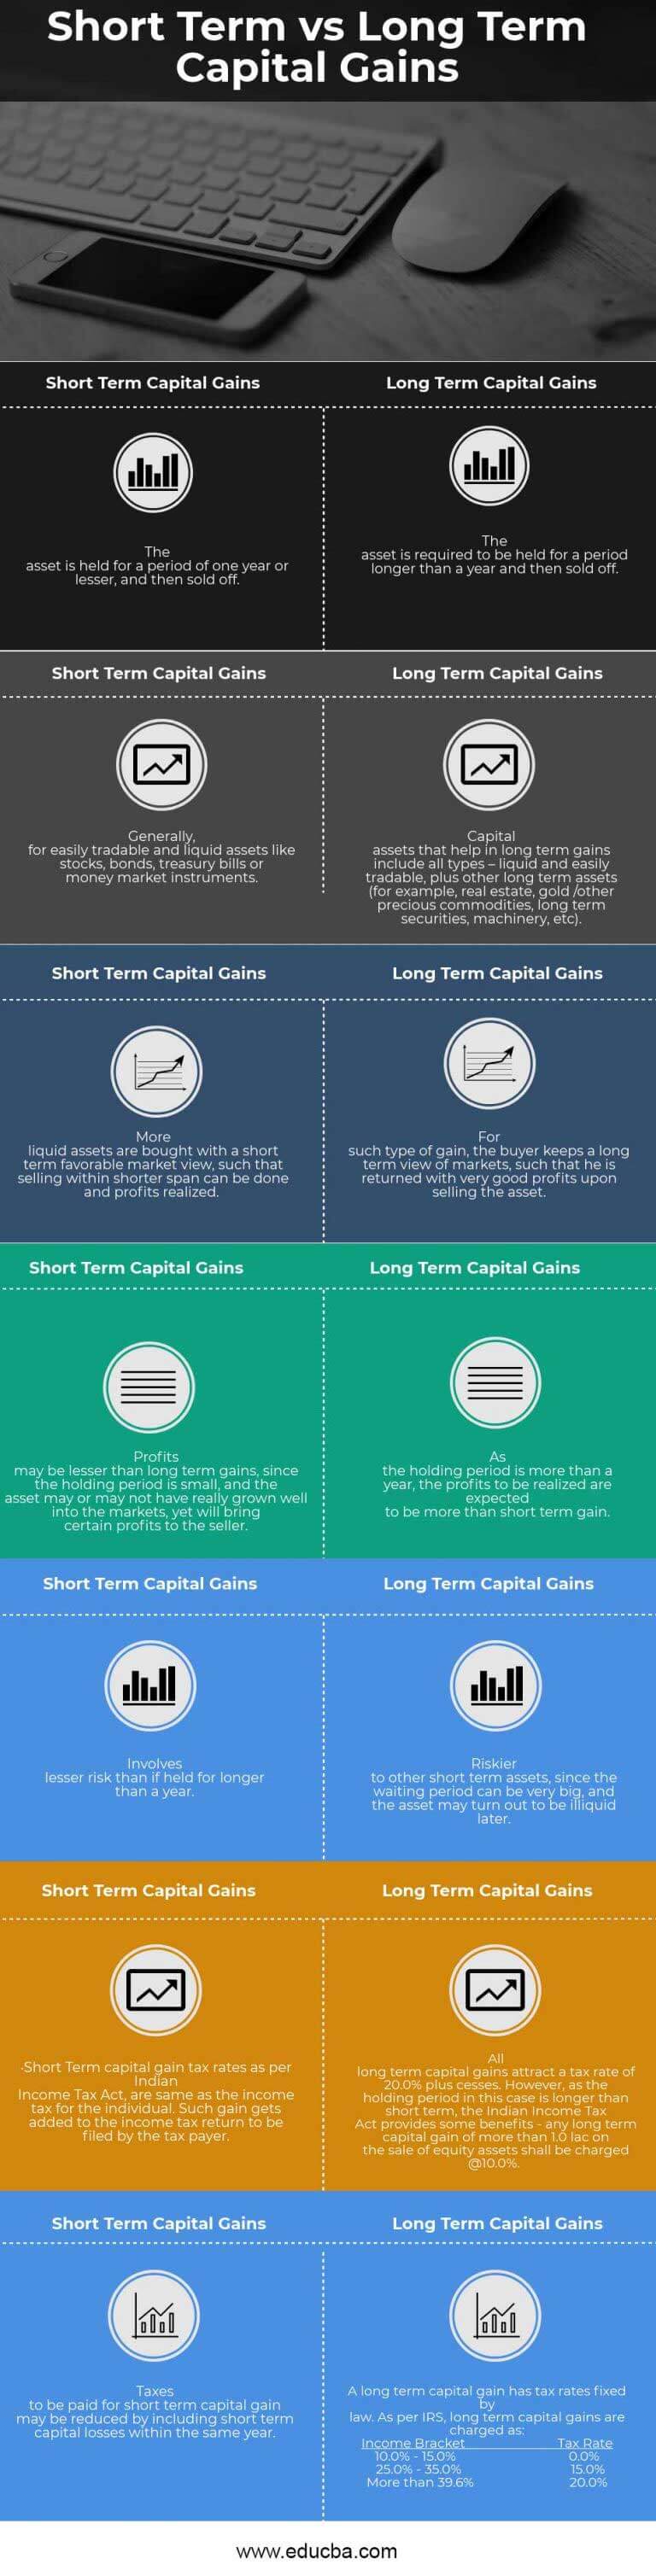 Short Term vs Long Term Capital Gains Top 7 Awesome Differences